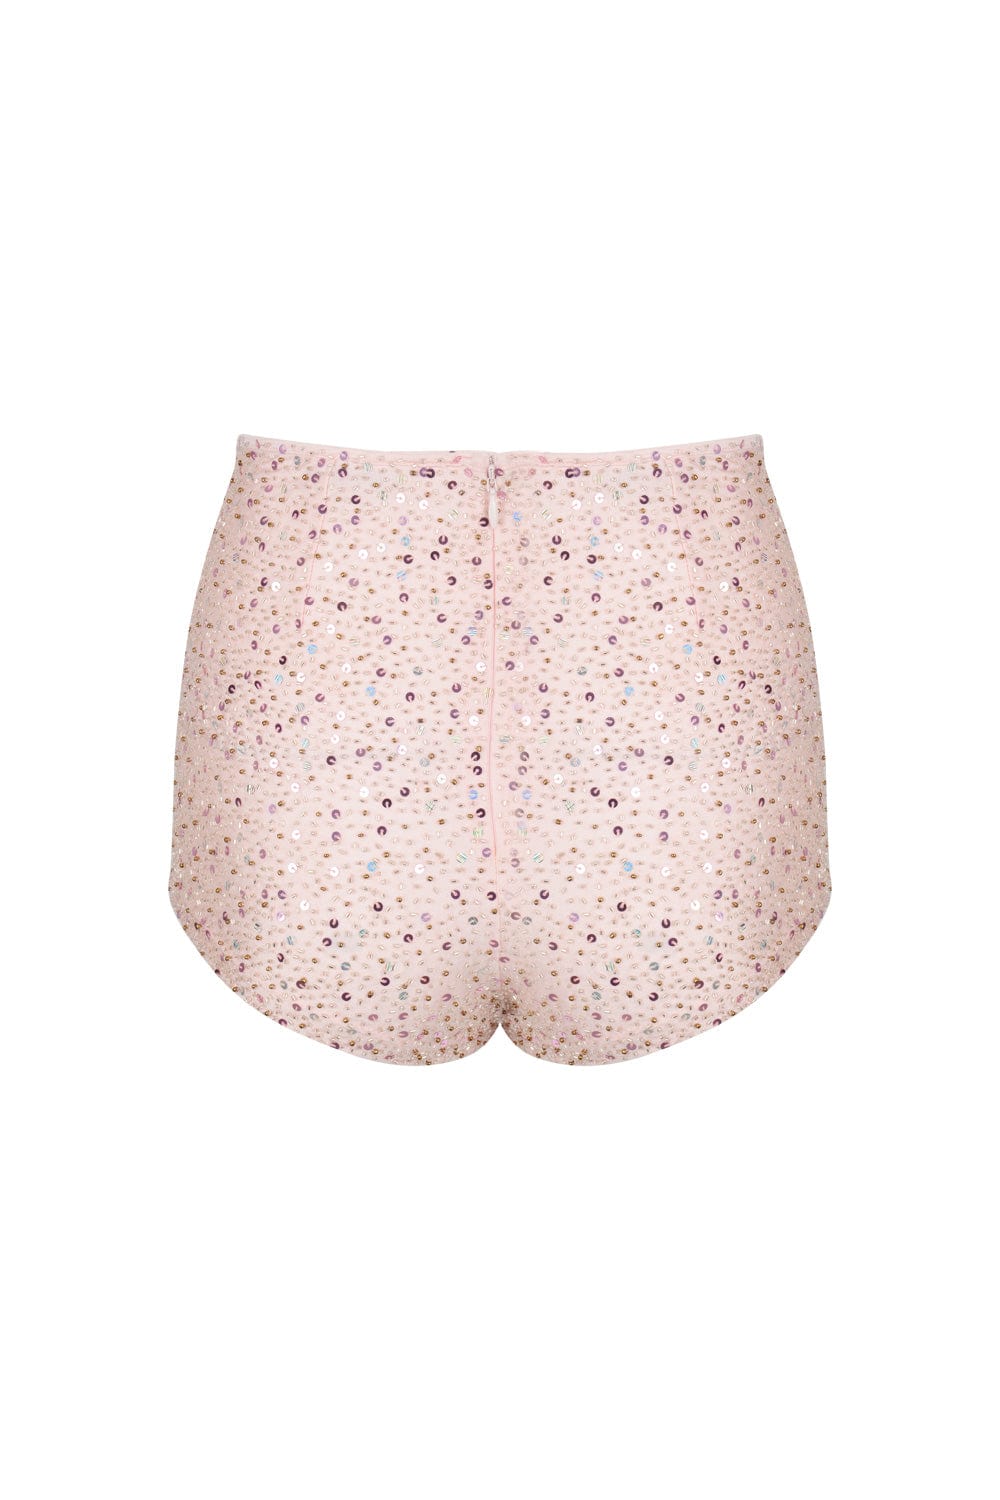 AMETHYST BEADED SPARKLE SHORTS - PINK - Her Pony